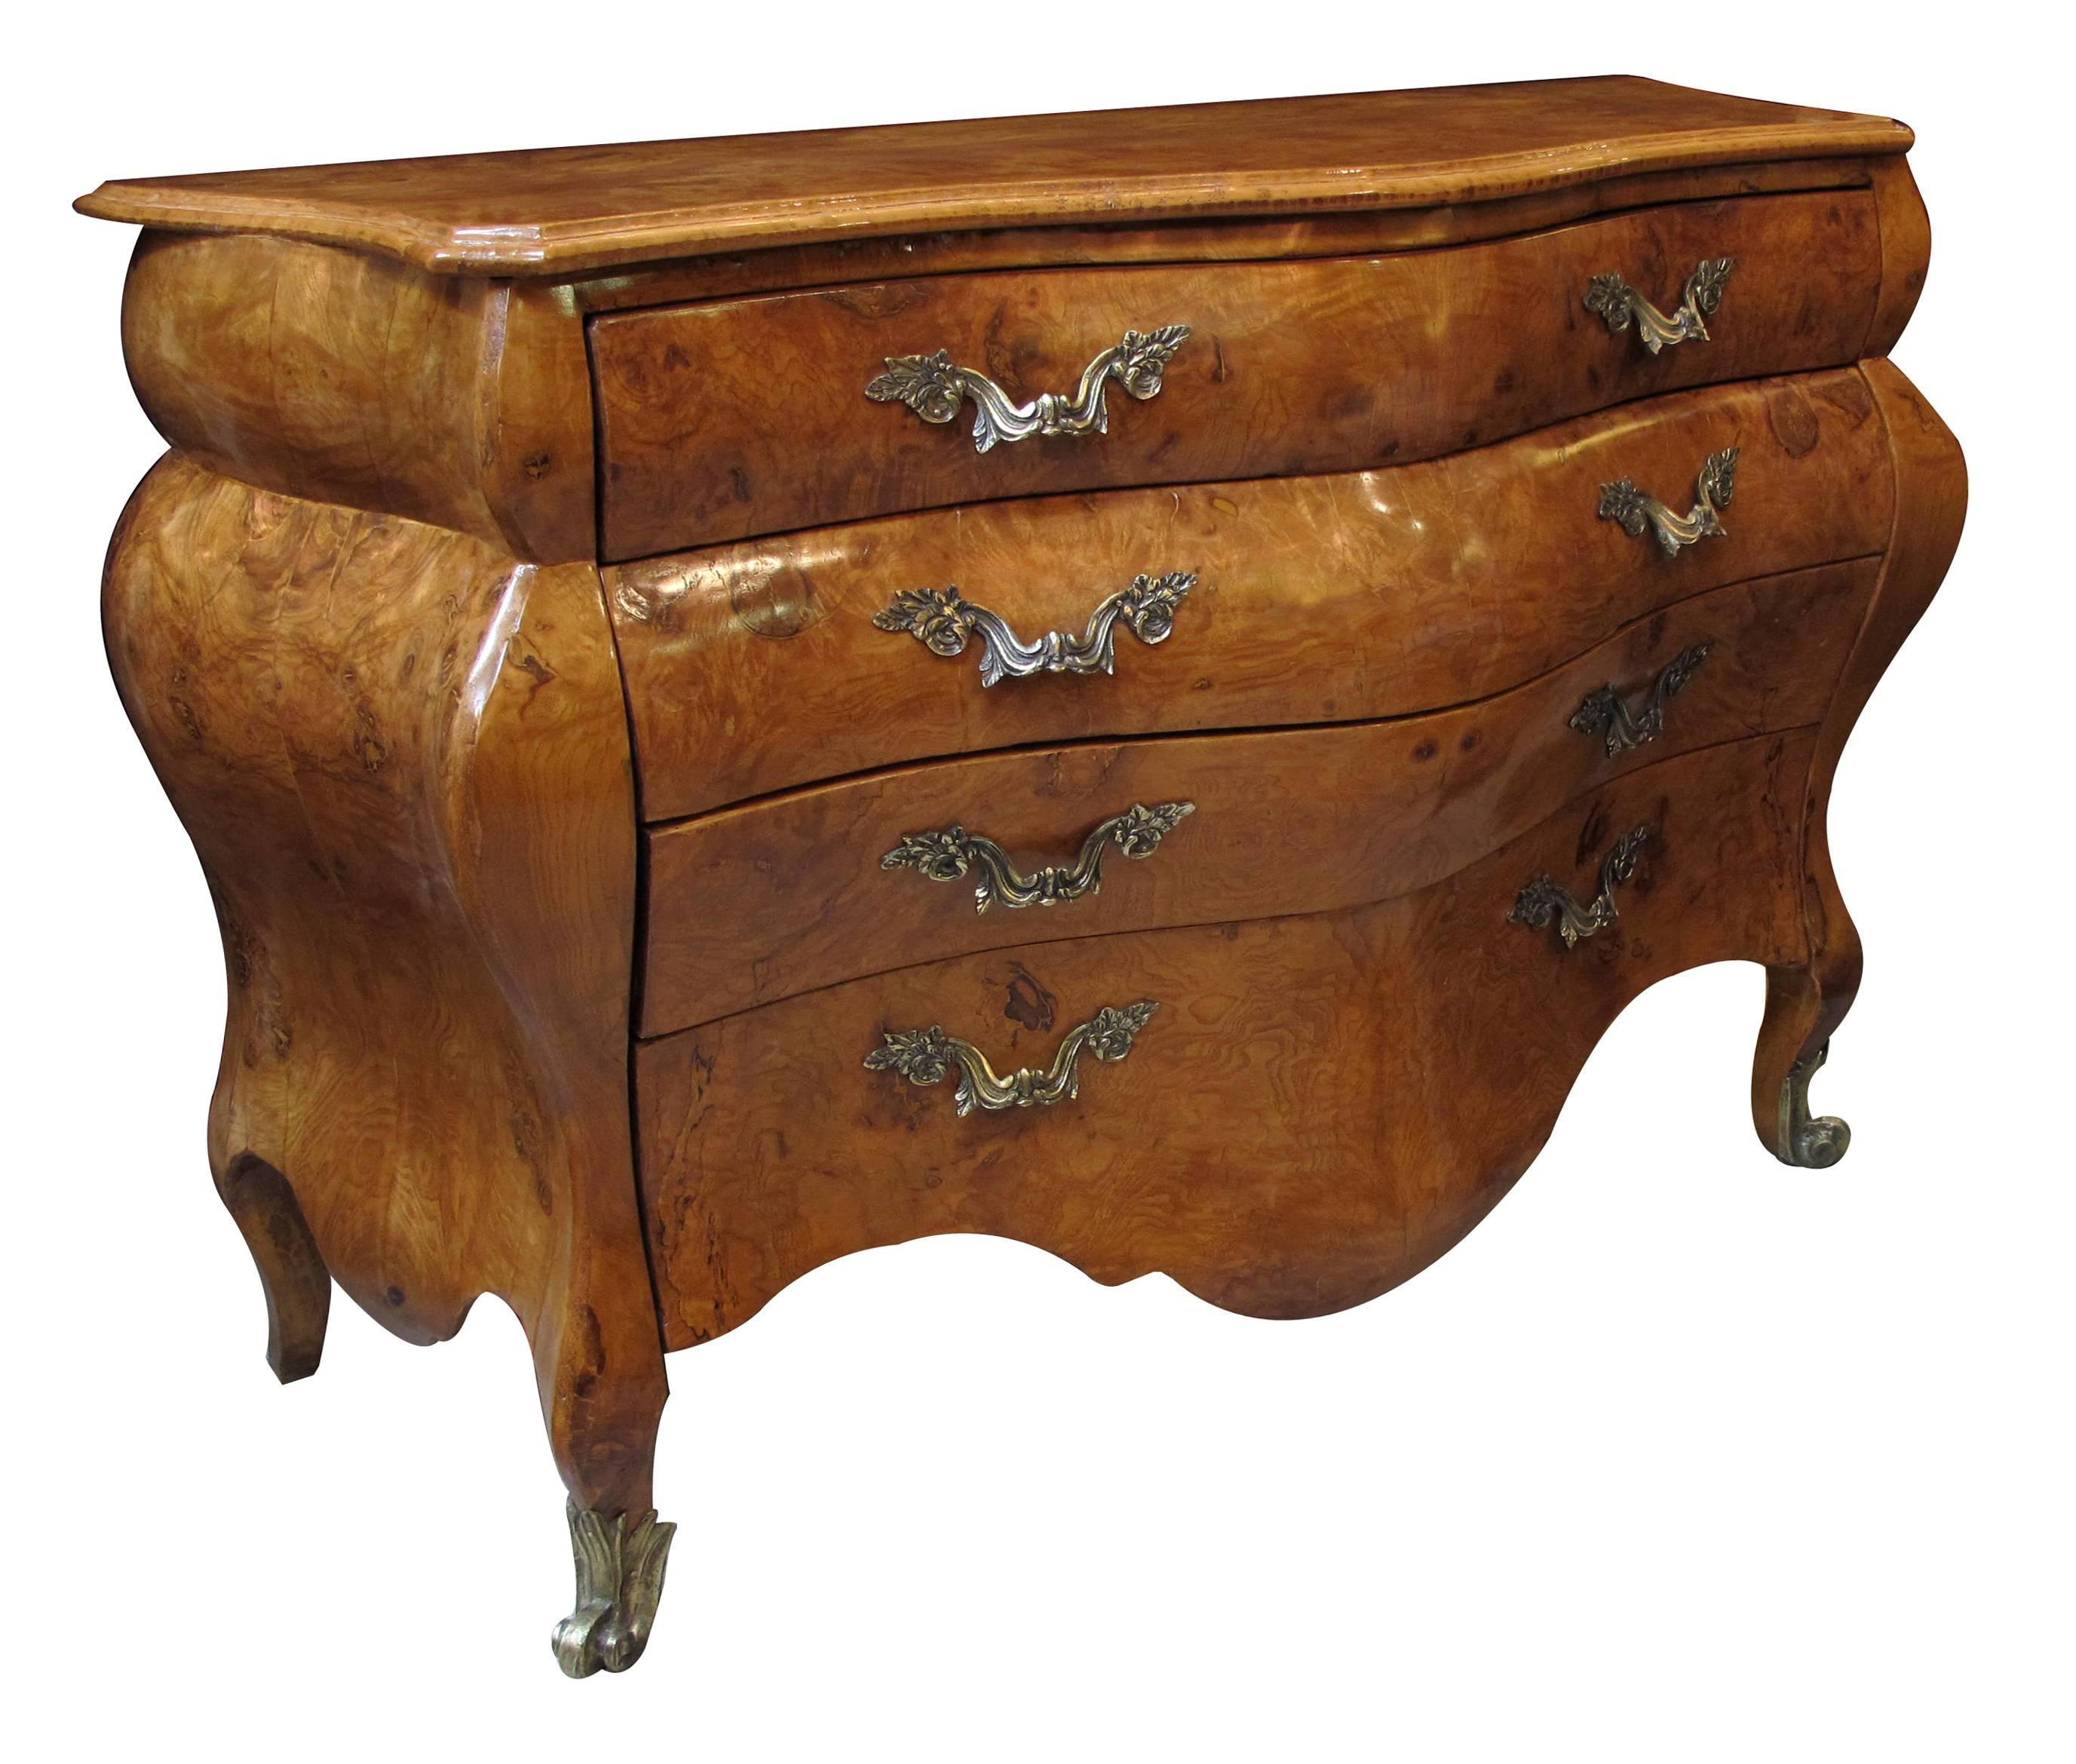 A shapely and large-scaled Italian rococo style olive wood bombe-form four-drawer chest; the serpentine top above a conforming curvaceous body fitted with 4 drawers above a deeply scalloped apron; raised on short cabriole supports with scrolled